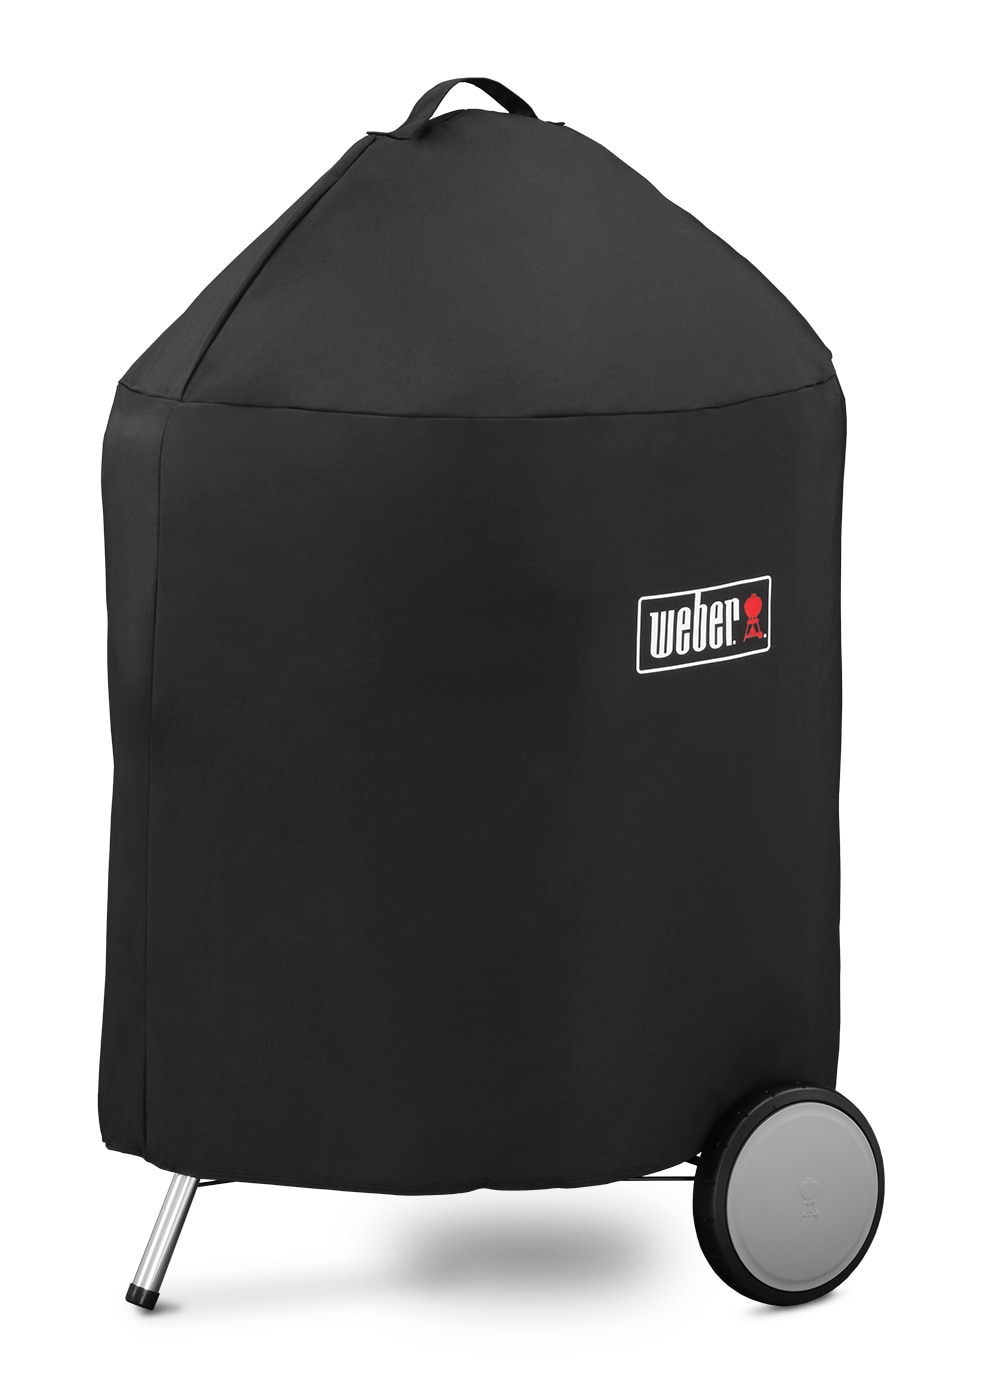 kran samling Uredelighed Weber 25-in W x 35-in H Black Charcoal Grill Cover in the Grill Covers  department at Lowes.com